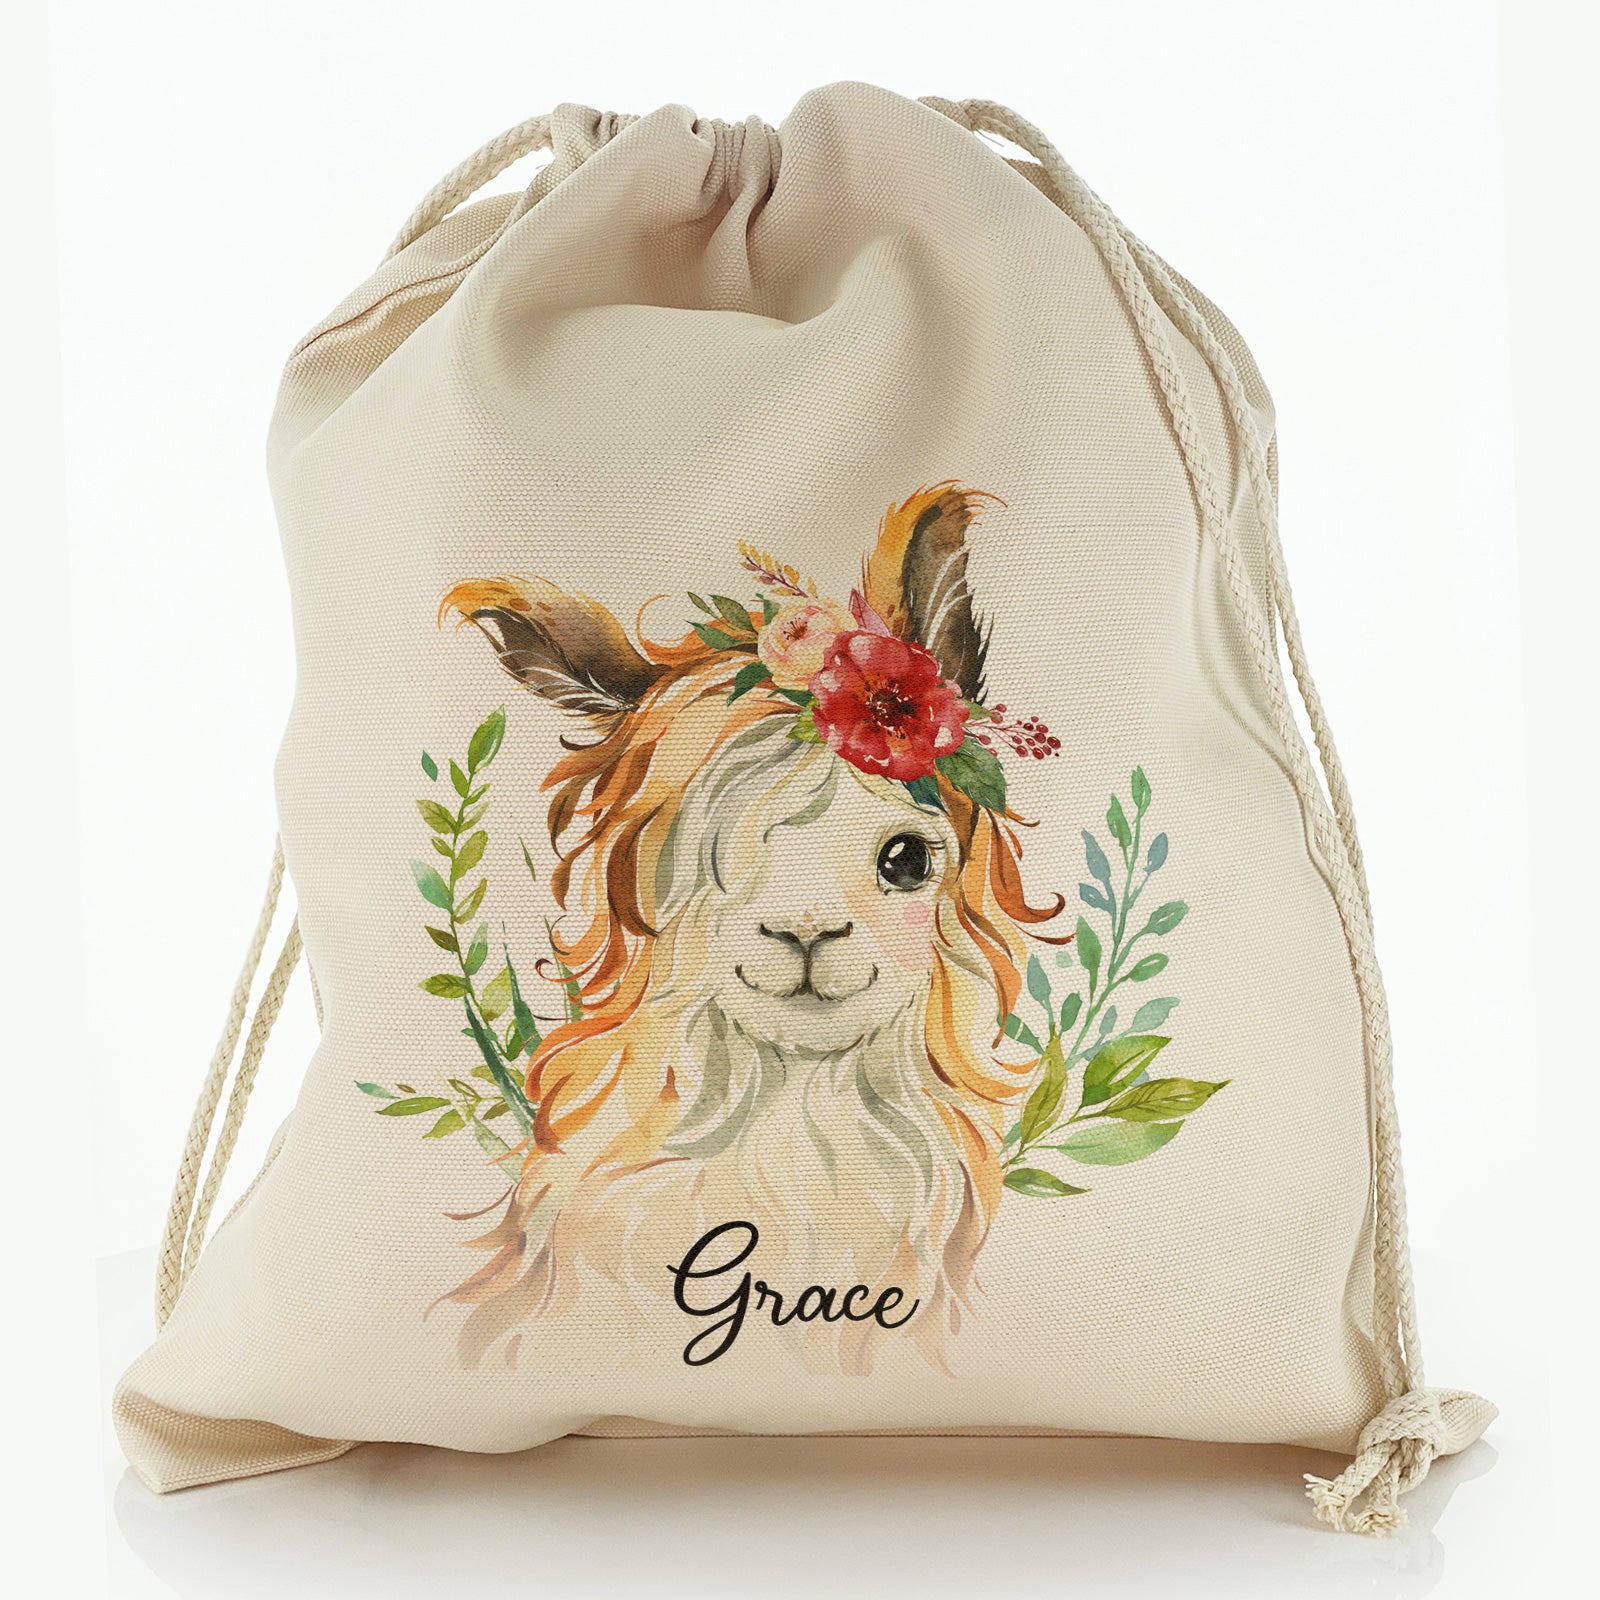 Personalised Canvas Sack with White Goat with Red Flower Hair and Cute Text